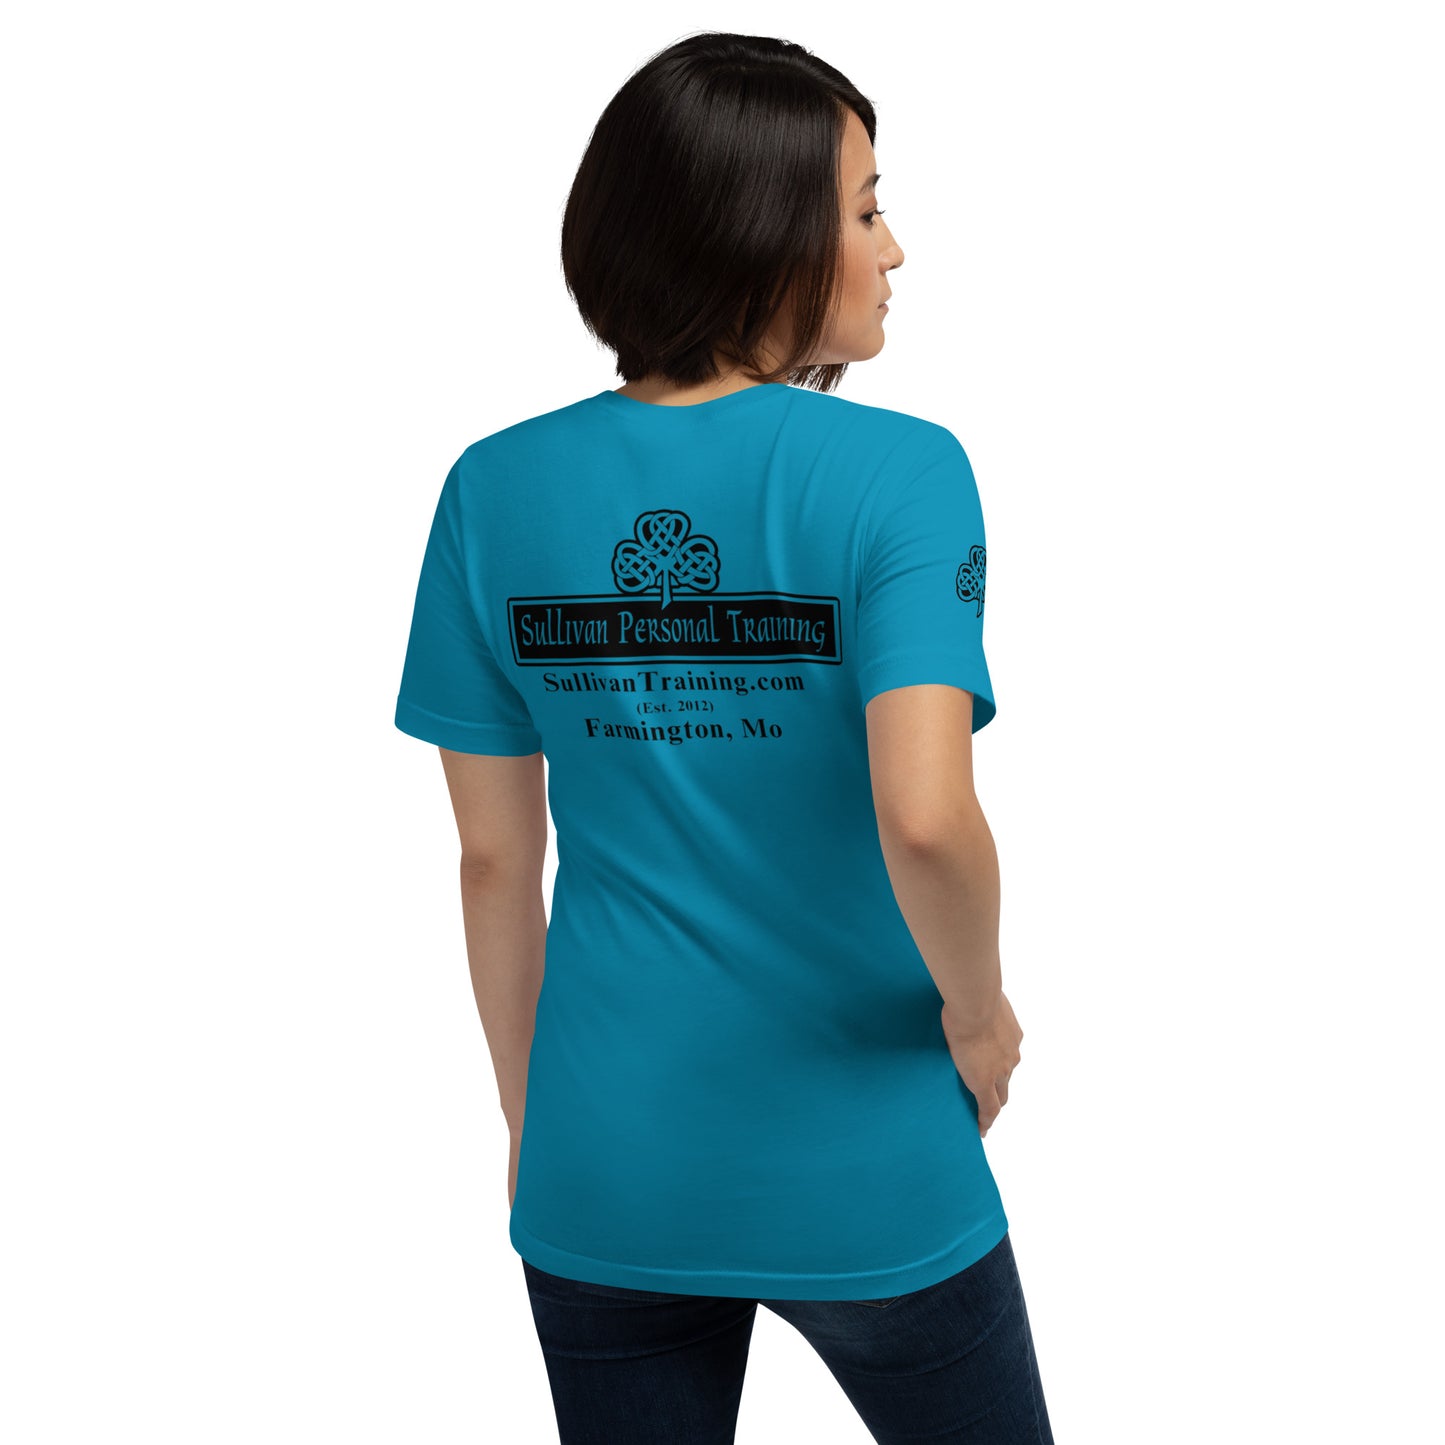 Lift Local - Unisex t-shirt with back and right sleeve